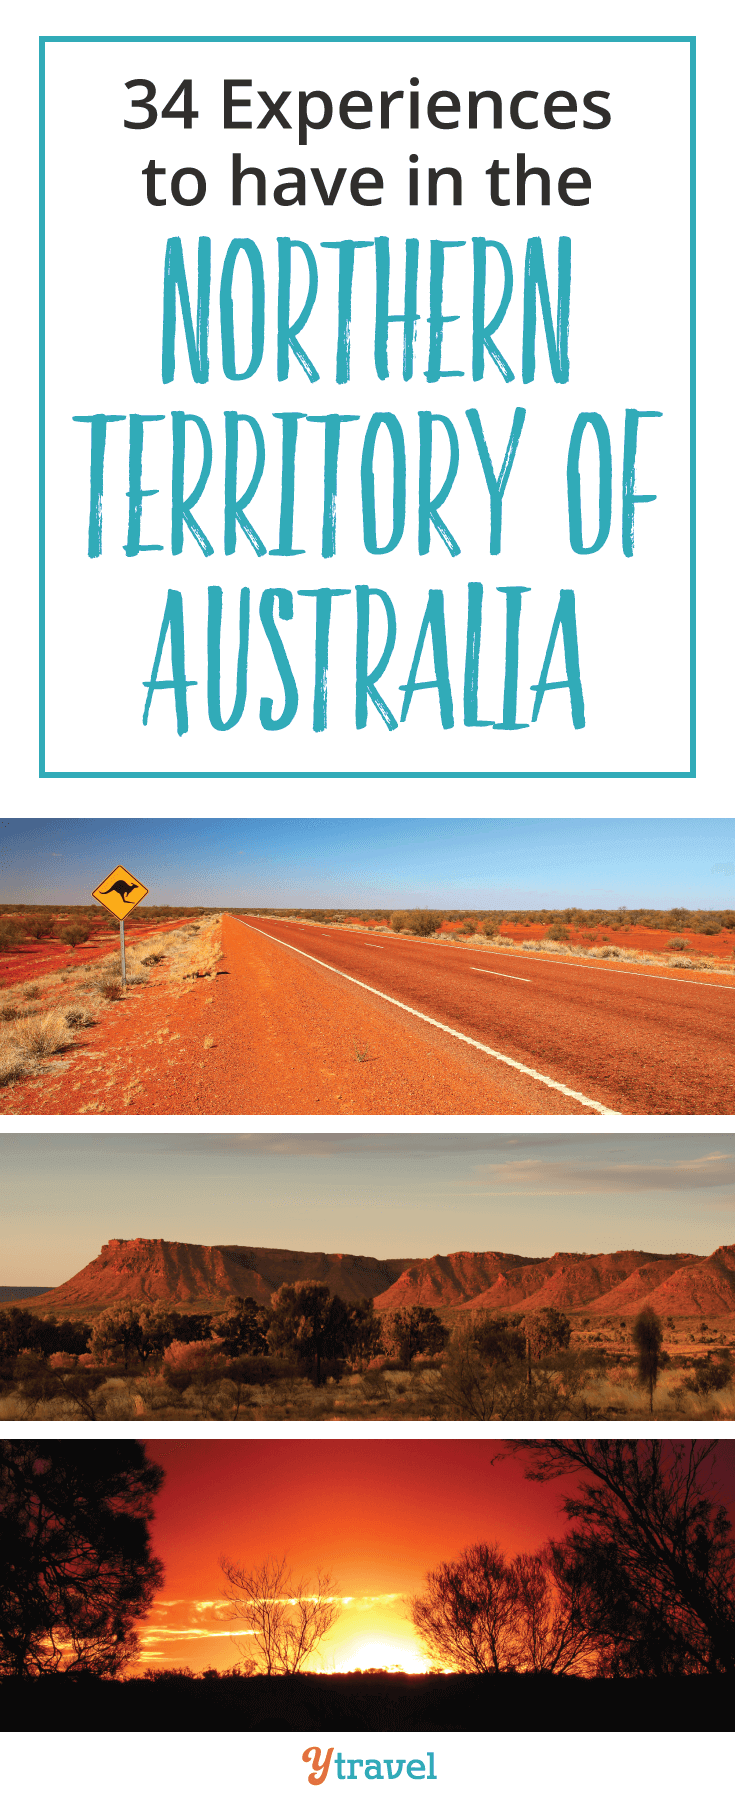 34 fun things to do in the Northern Territory of Australia. Experience the stunning beauty the Outback has to offer.